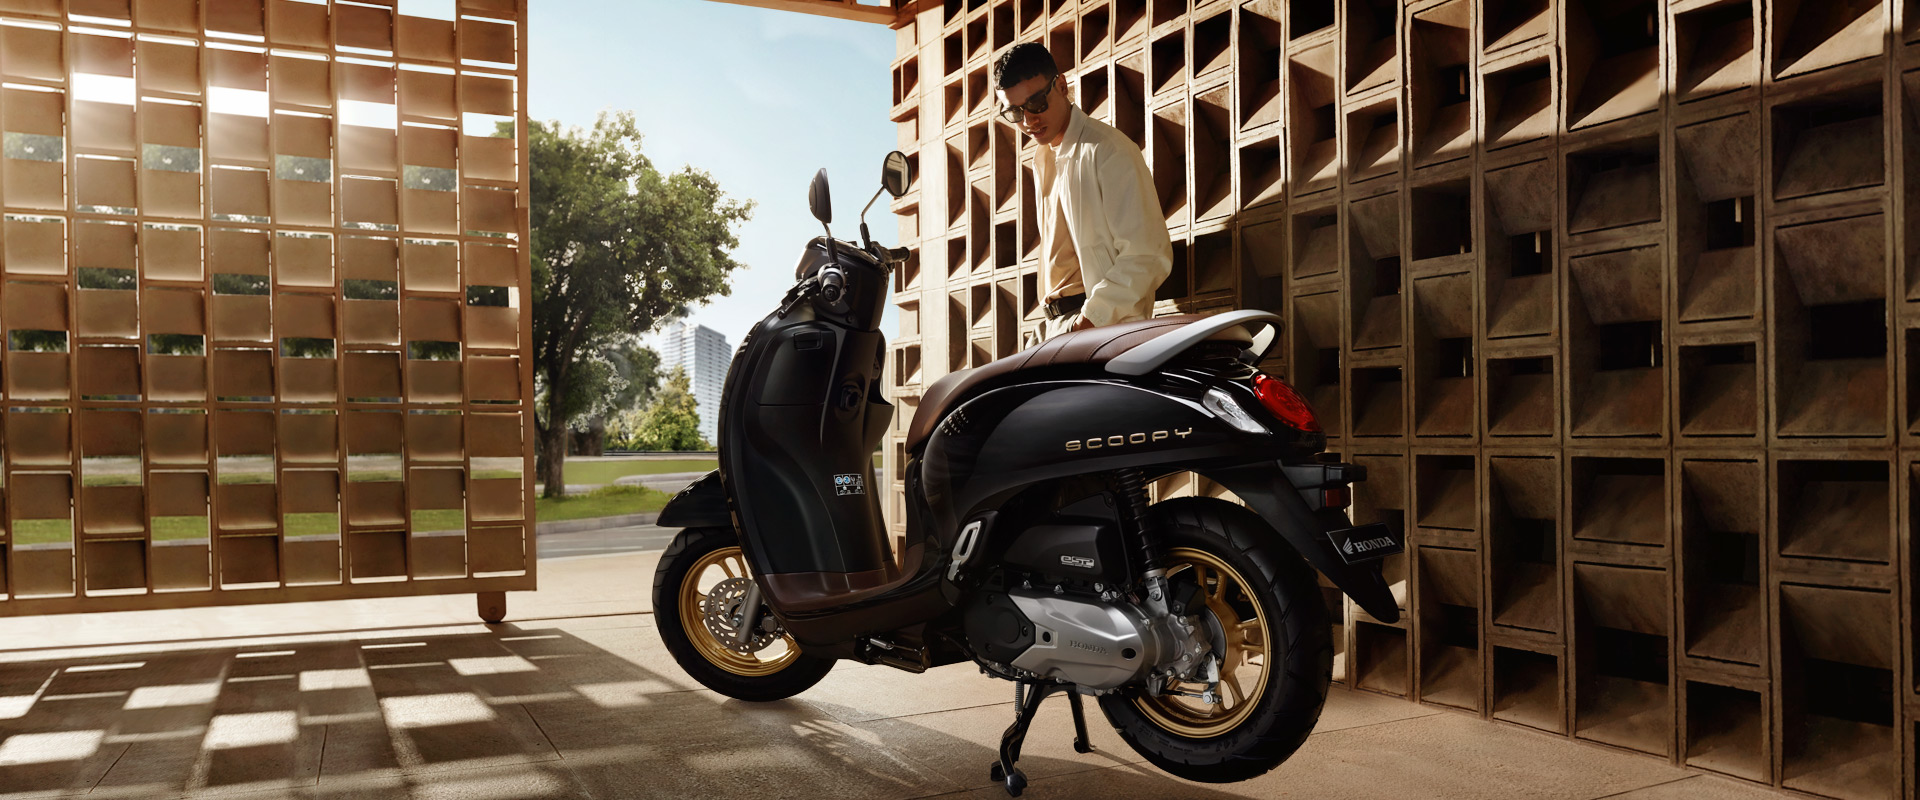 2021 Honda Scoopy is a unique looking scooter delivering